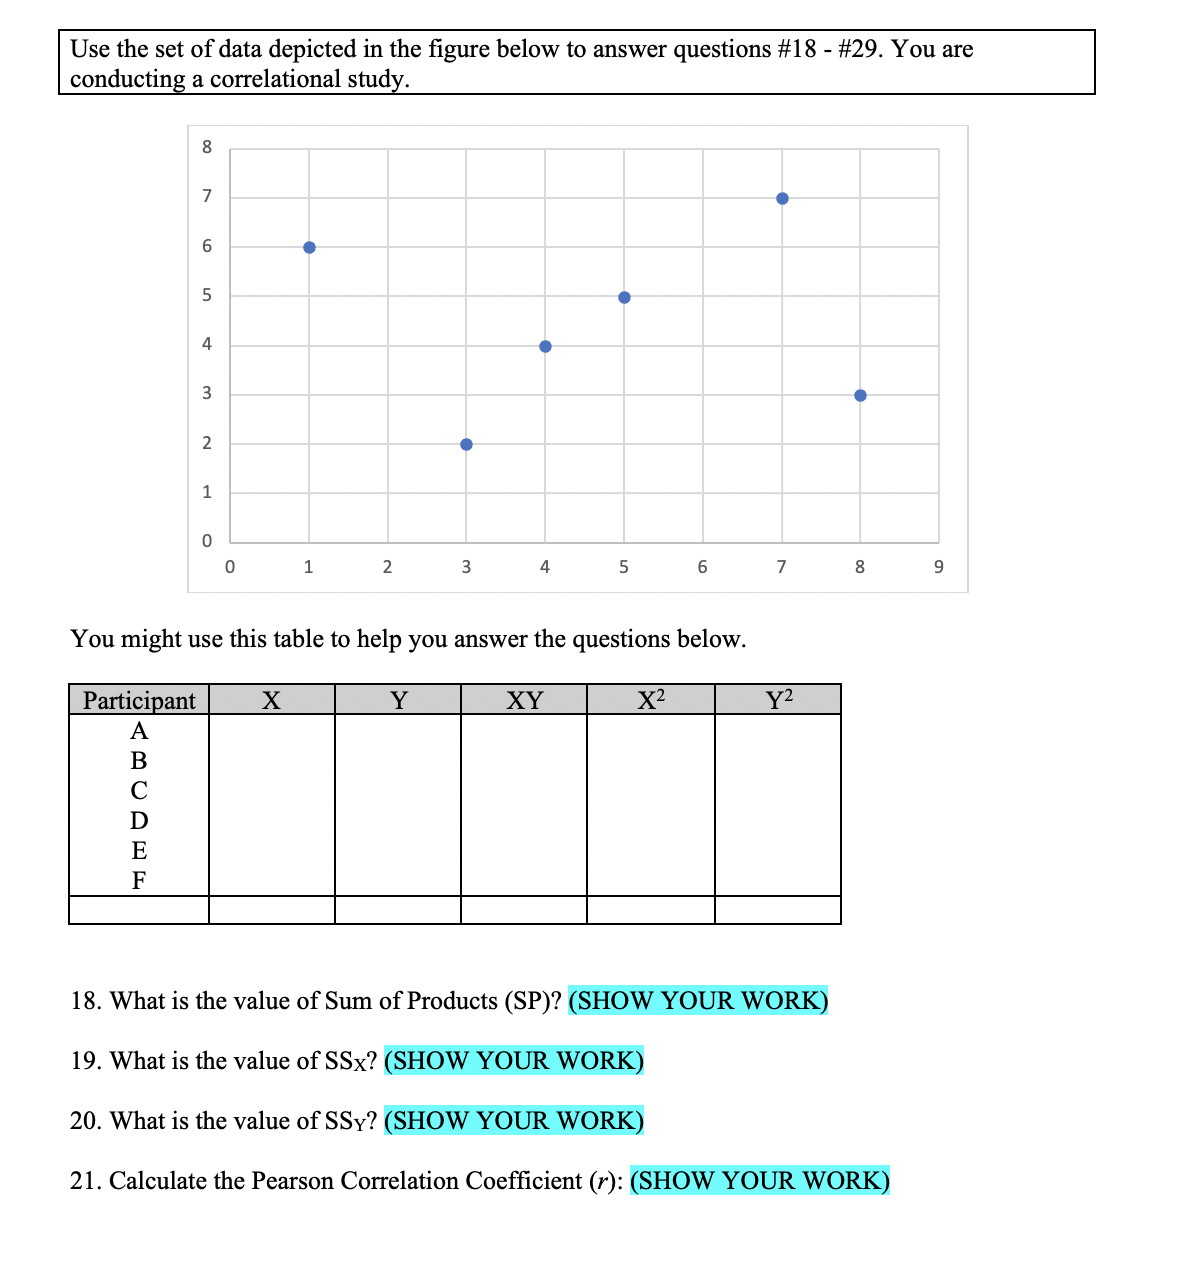 Use the set of data depicted in the figure below to answer questions #18 - #29. You are
conducting a correlational study.
8
7
5
4
3
1
1
4
6.
7
8
9.
You might use this table to help you answer the questions below.
Y2
Participant
А
Y
XY
X?
B
C
D
E
F
18. What is the value of Sum of Products (SP)? (SHOW YOUR WORK)
19. What is the value of SSx? (SHOW YOUR WORK)
20. What is the value of SSy? (SHOW YOUR WORK)
21. Calculate the Pearson Correlation Coefficient (r): (SHOW YOUR WORK)
